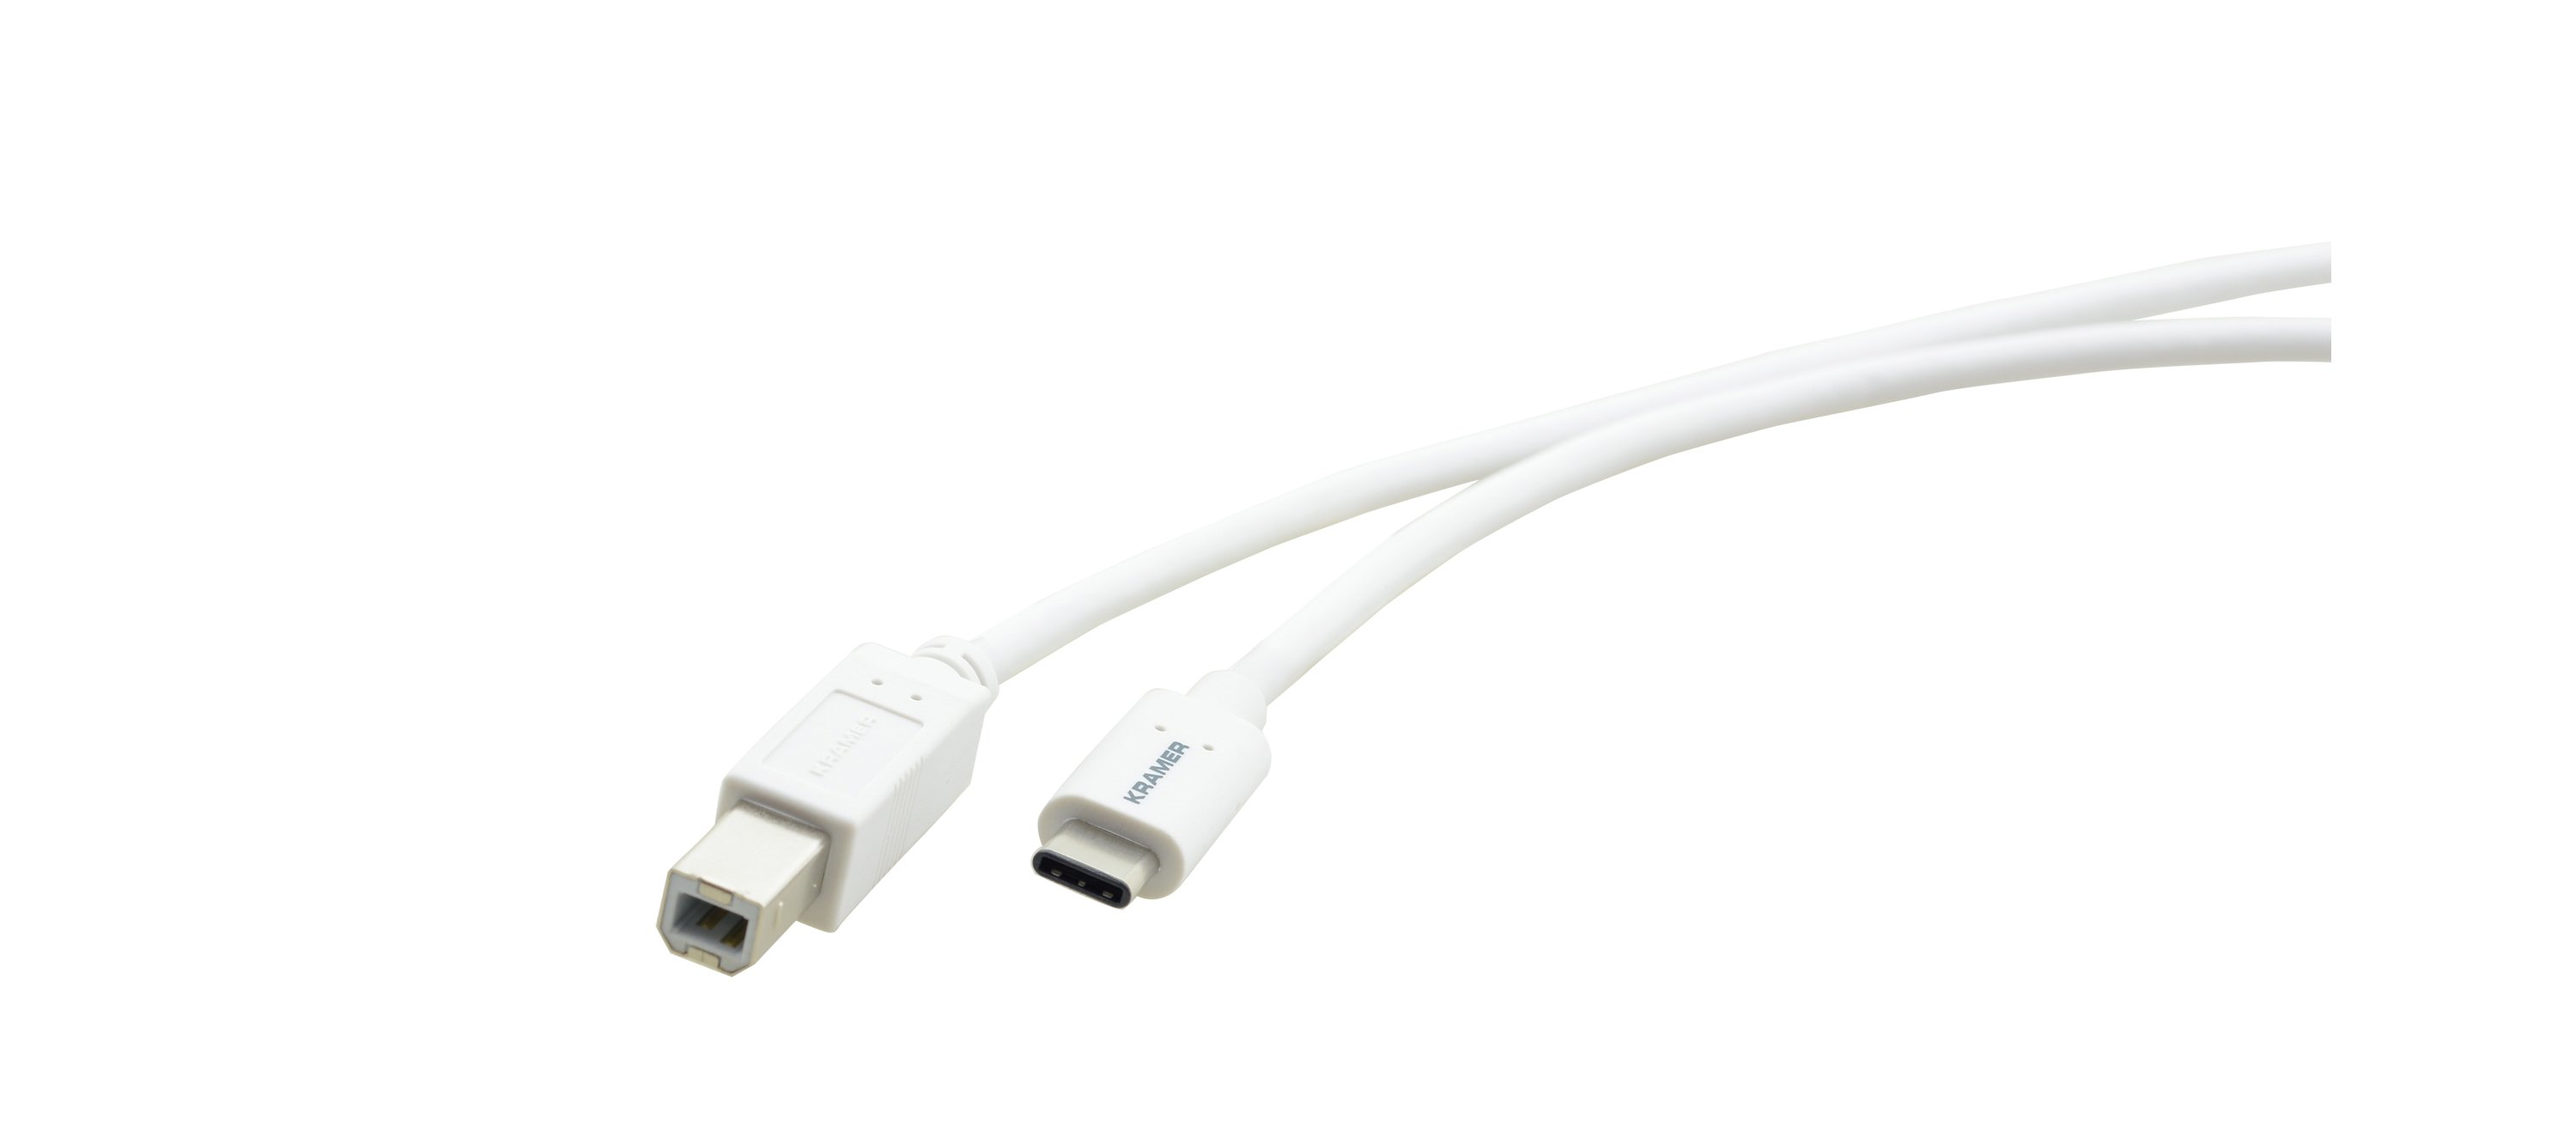 C-USB/CB-6 USB 2.0 C(M) to B(M) Cable-6ft